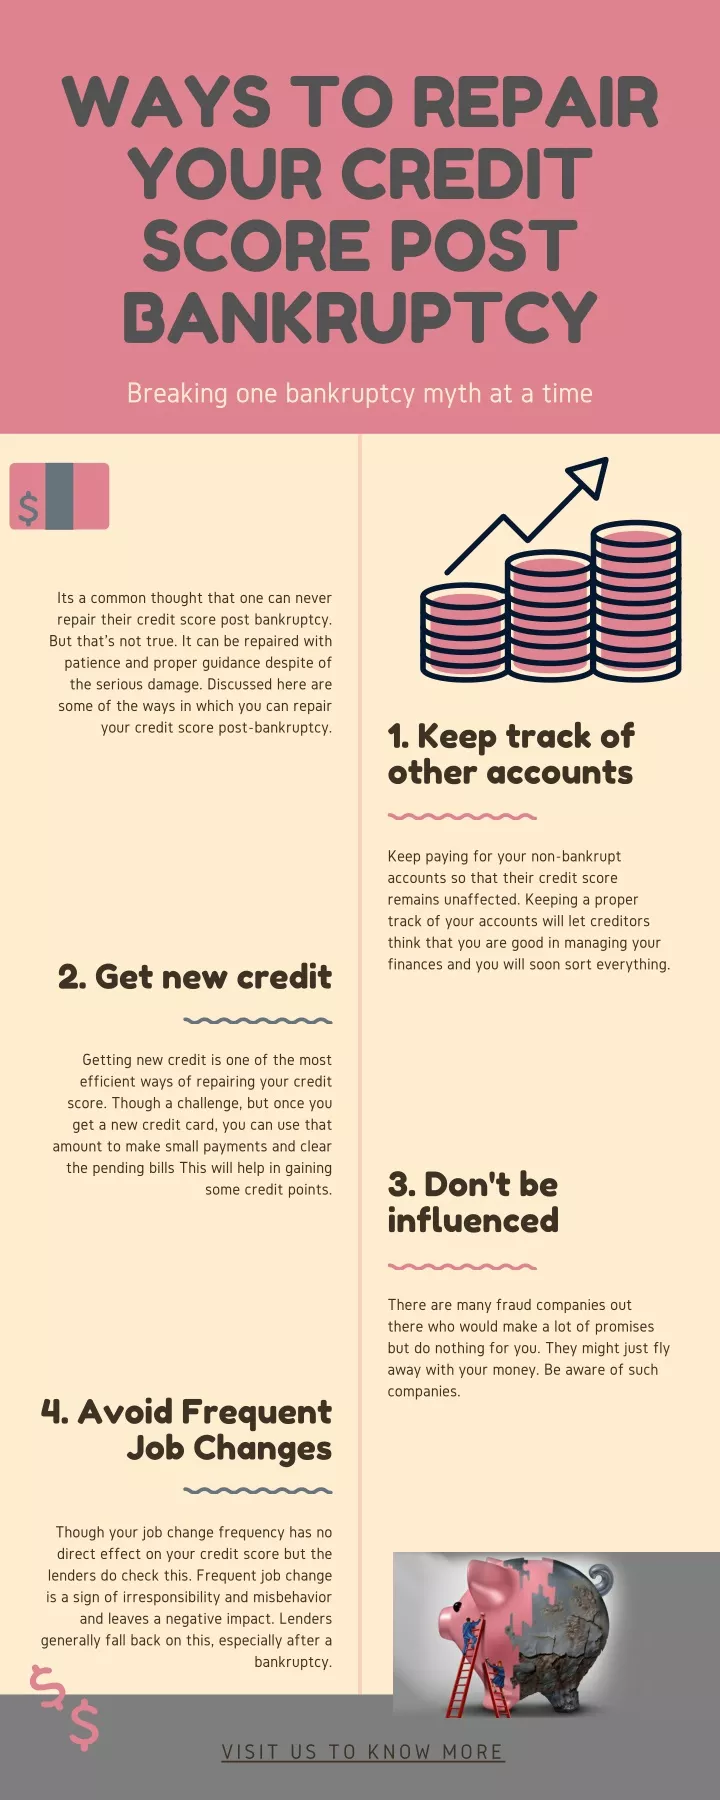 ways to repair your credit score post bankruptcy